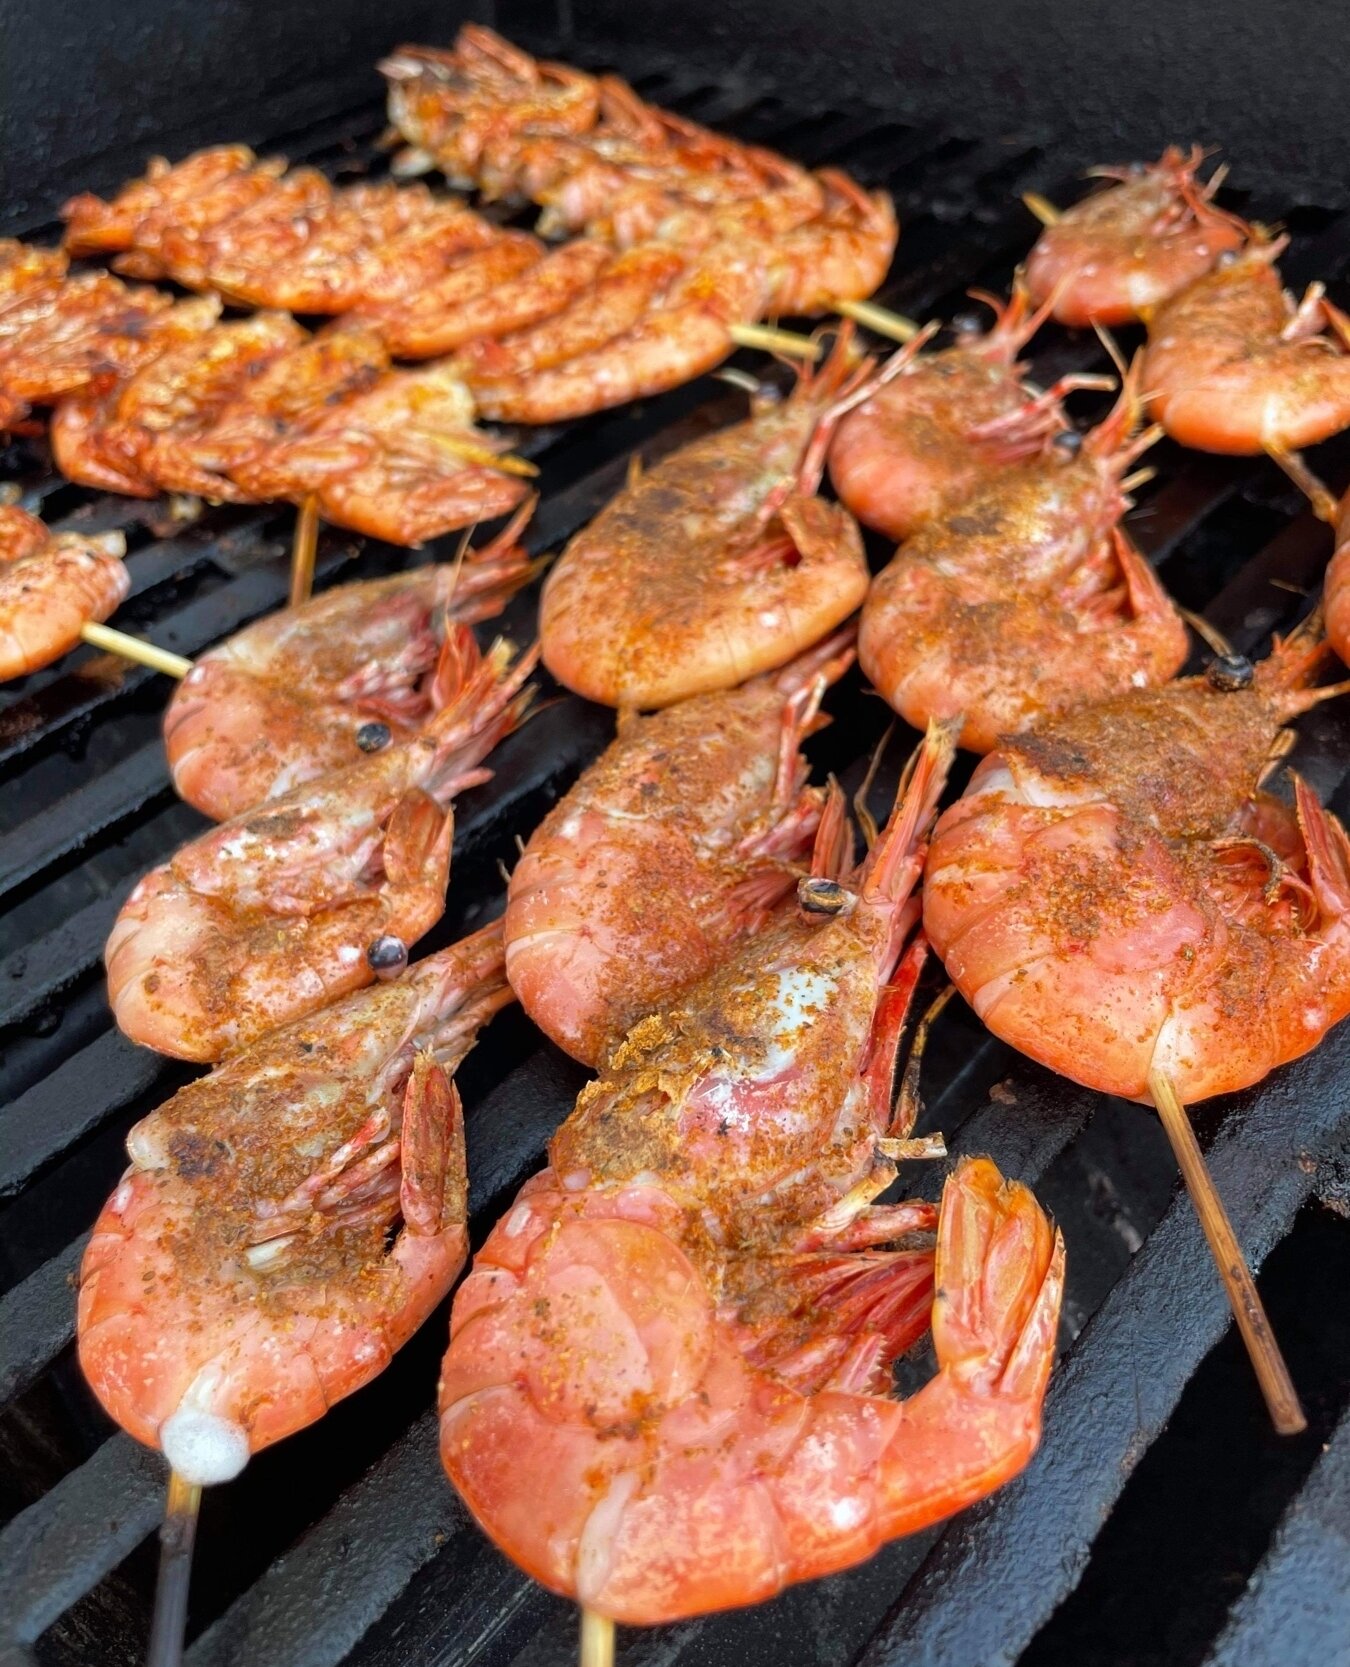 Who's bbq-ing this weekend? 😋 Reminder that it's May Long Weekend, we will be busy this weekend! Pre-orders are sold out until Tuesday next week 🦐 We are open daily at 8:00 AM for walk-up dock sales until we sell out! See you at the Steveston Fishe